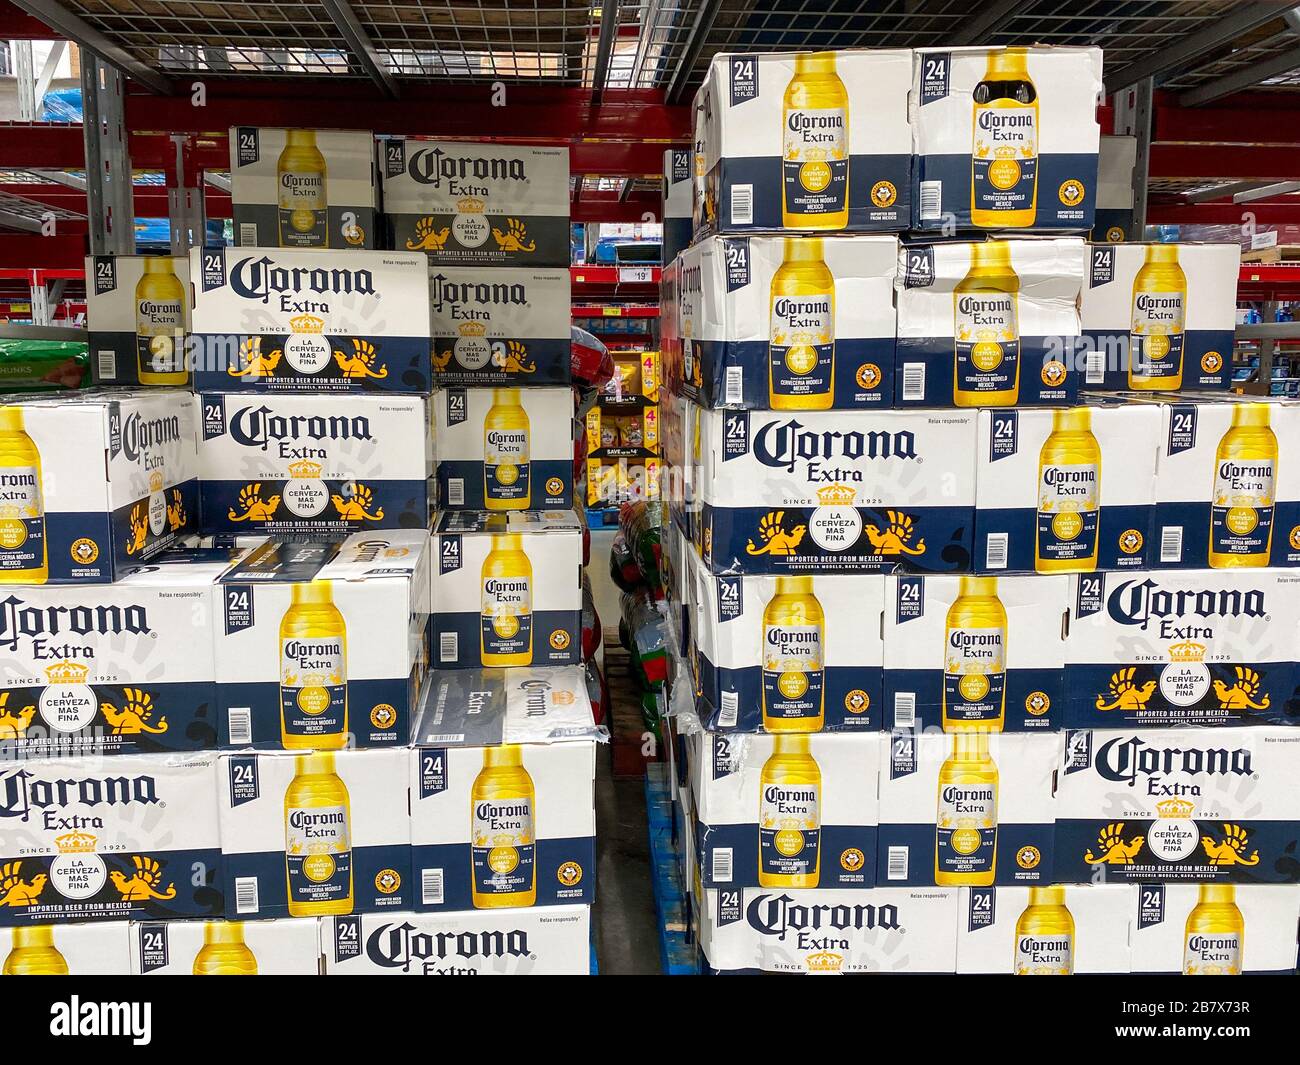 Orlando, FL/USA-3/12/20: A display of boxes of bottles of Corona Extra on a  display shelf of a Sams Club Warehouse Grocery Store Stock Photo - Alamy